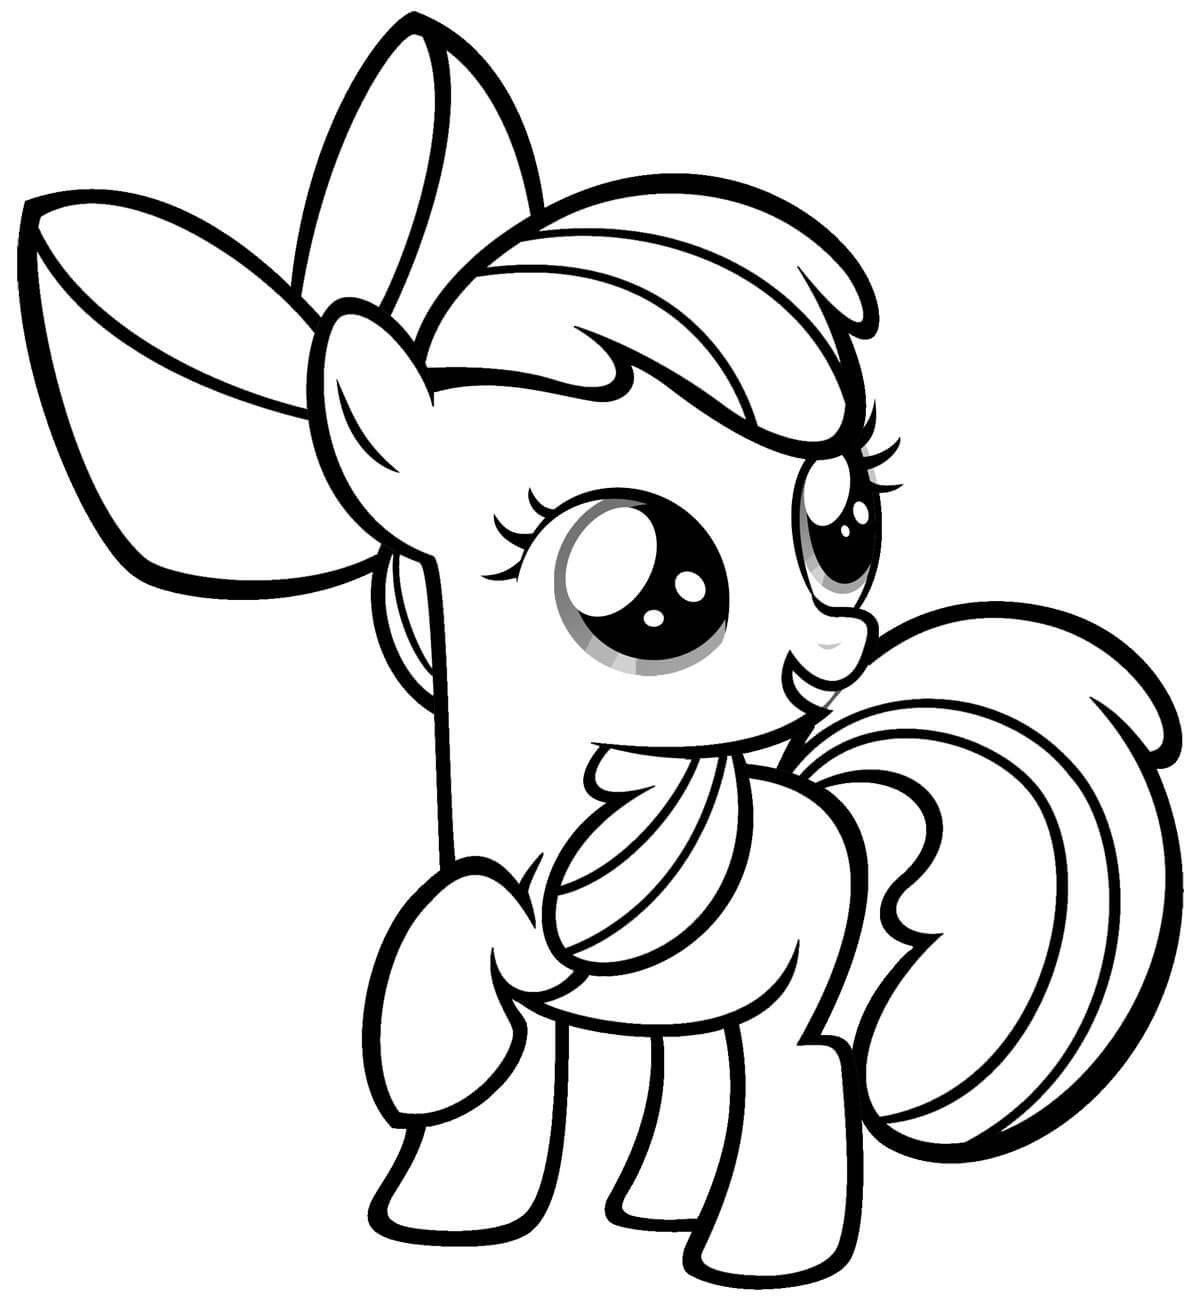 MLP Pony Coloring Page